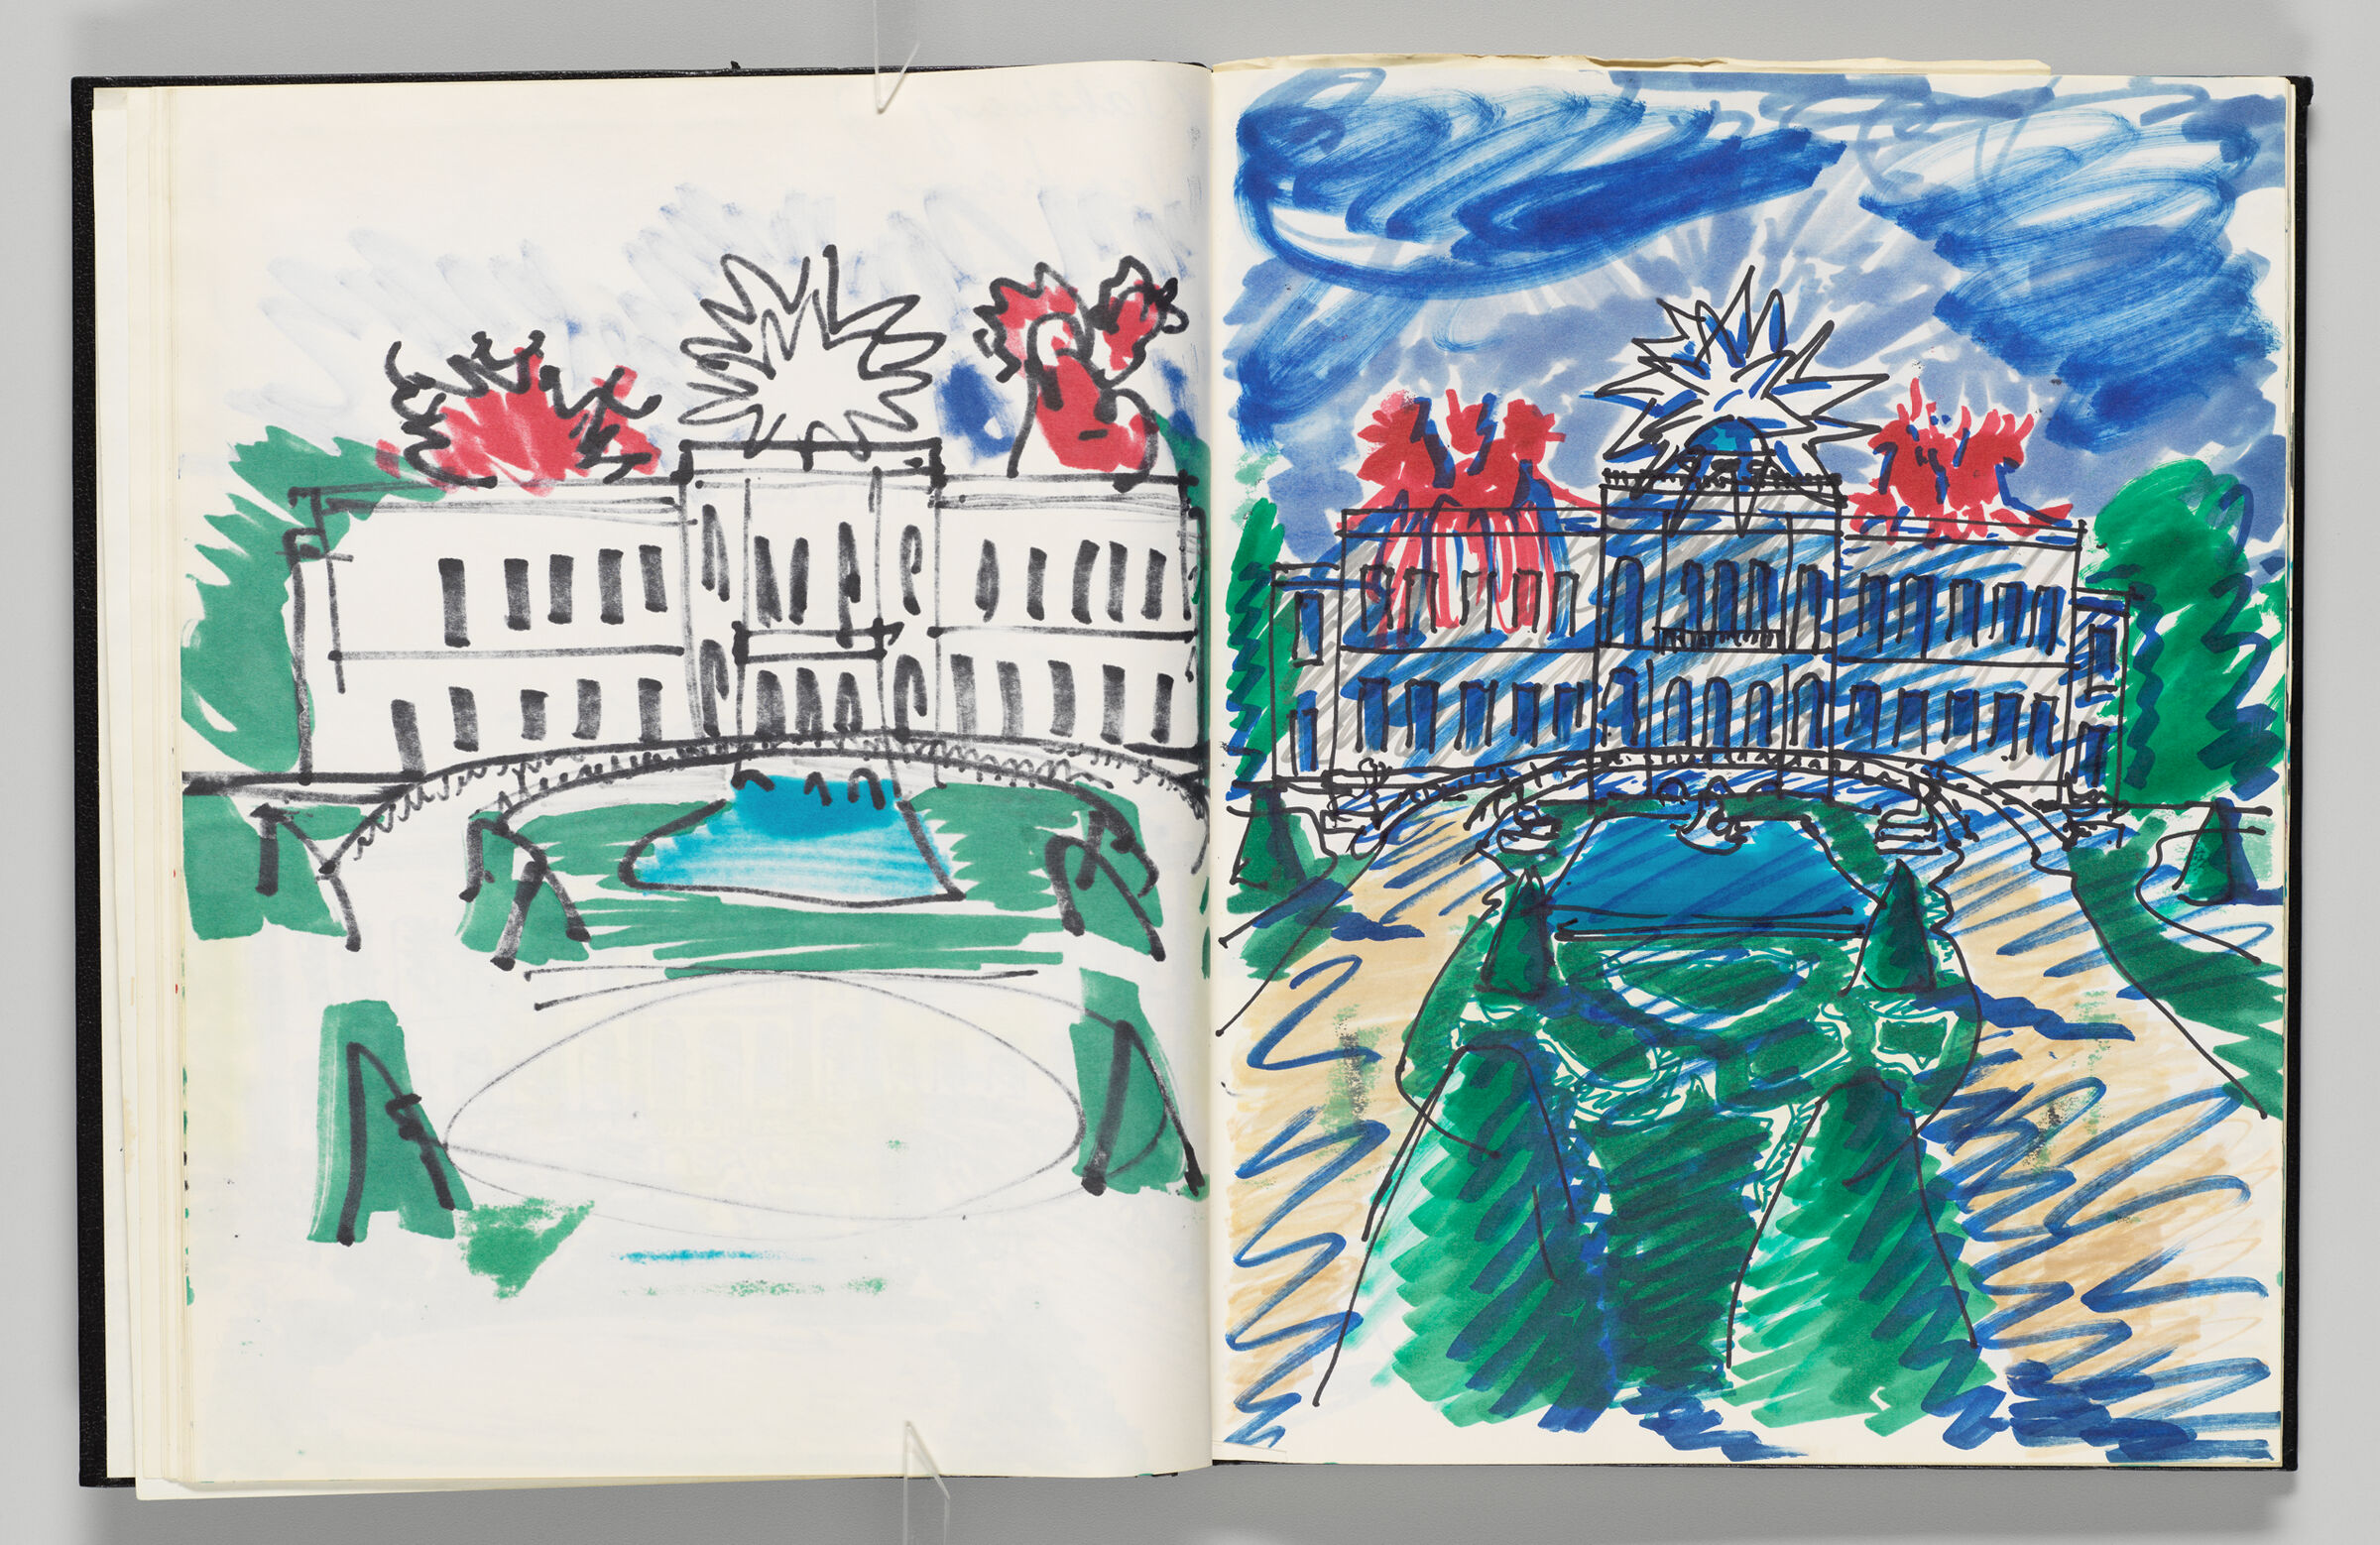 Untitled (Bleed-Through Of Previous Page, Left Page); Untitled (Schloss Klessheim, Right Page)